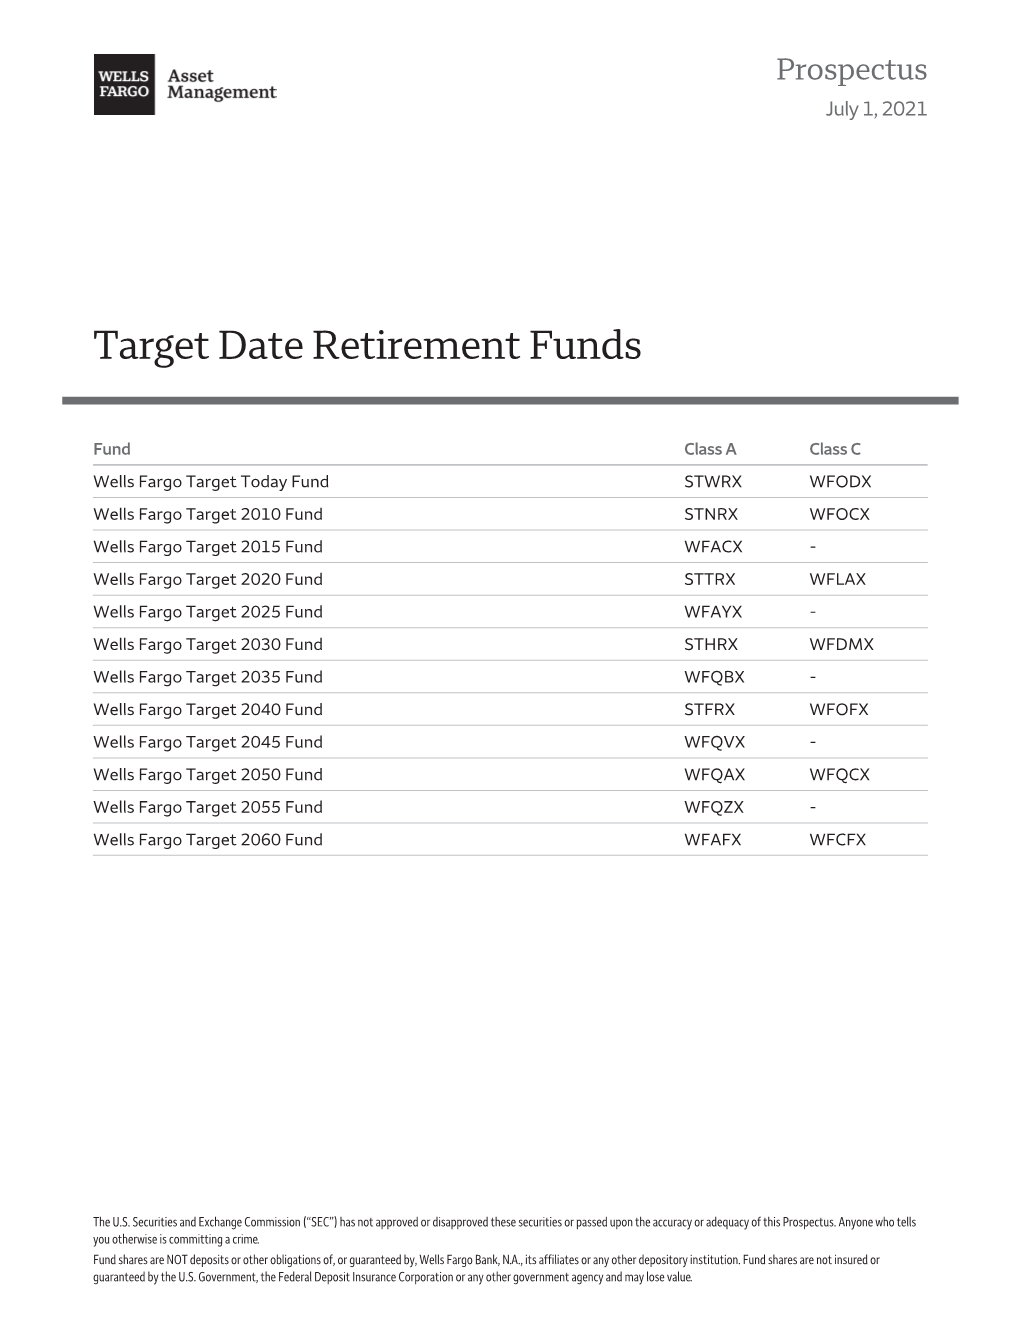 Target Date Retirement Funds